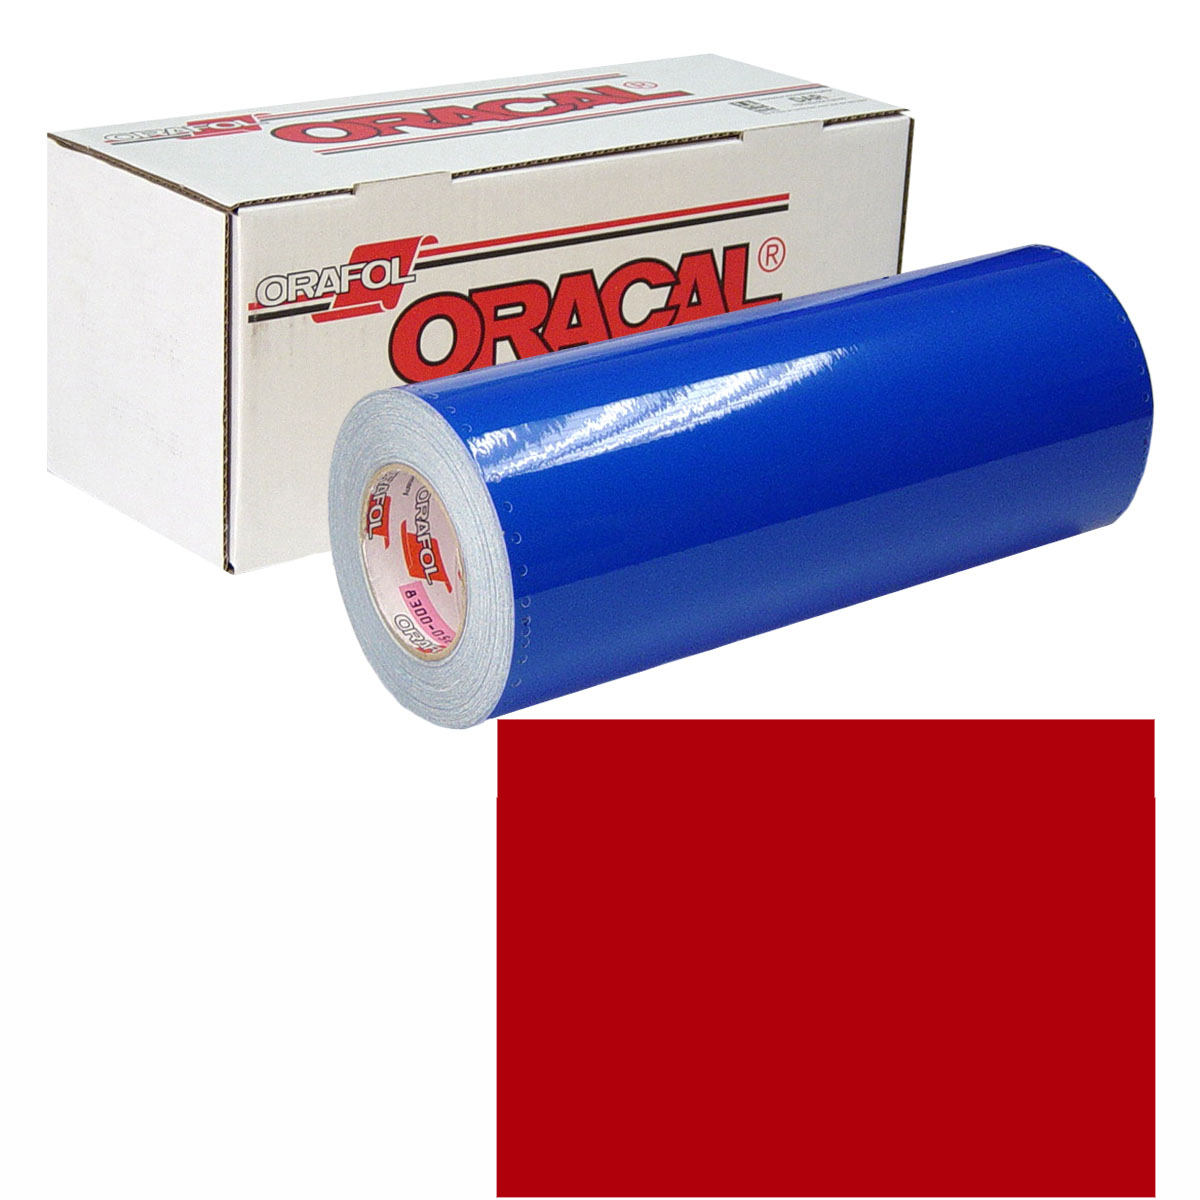 ORACAL 631 30in X 50yd 031 Red